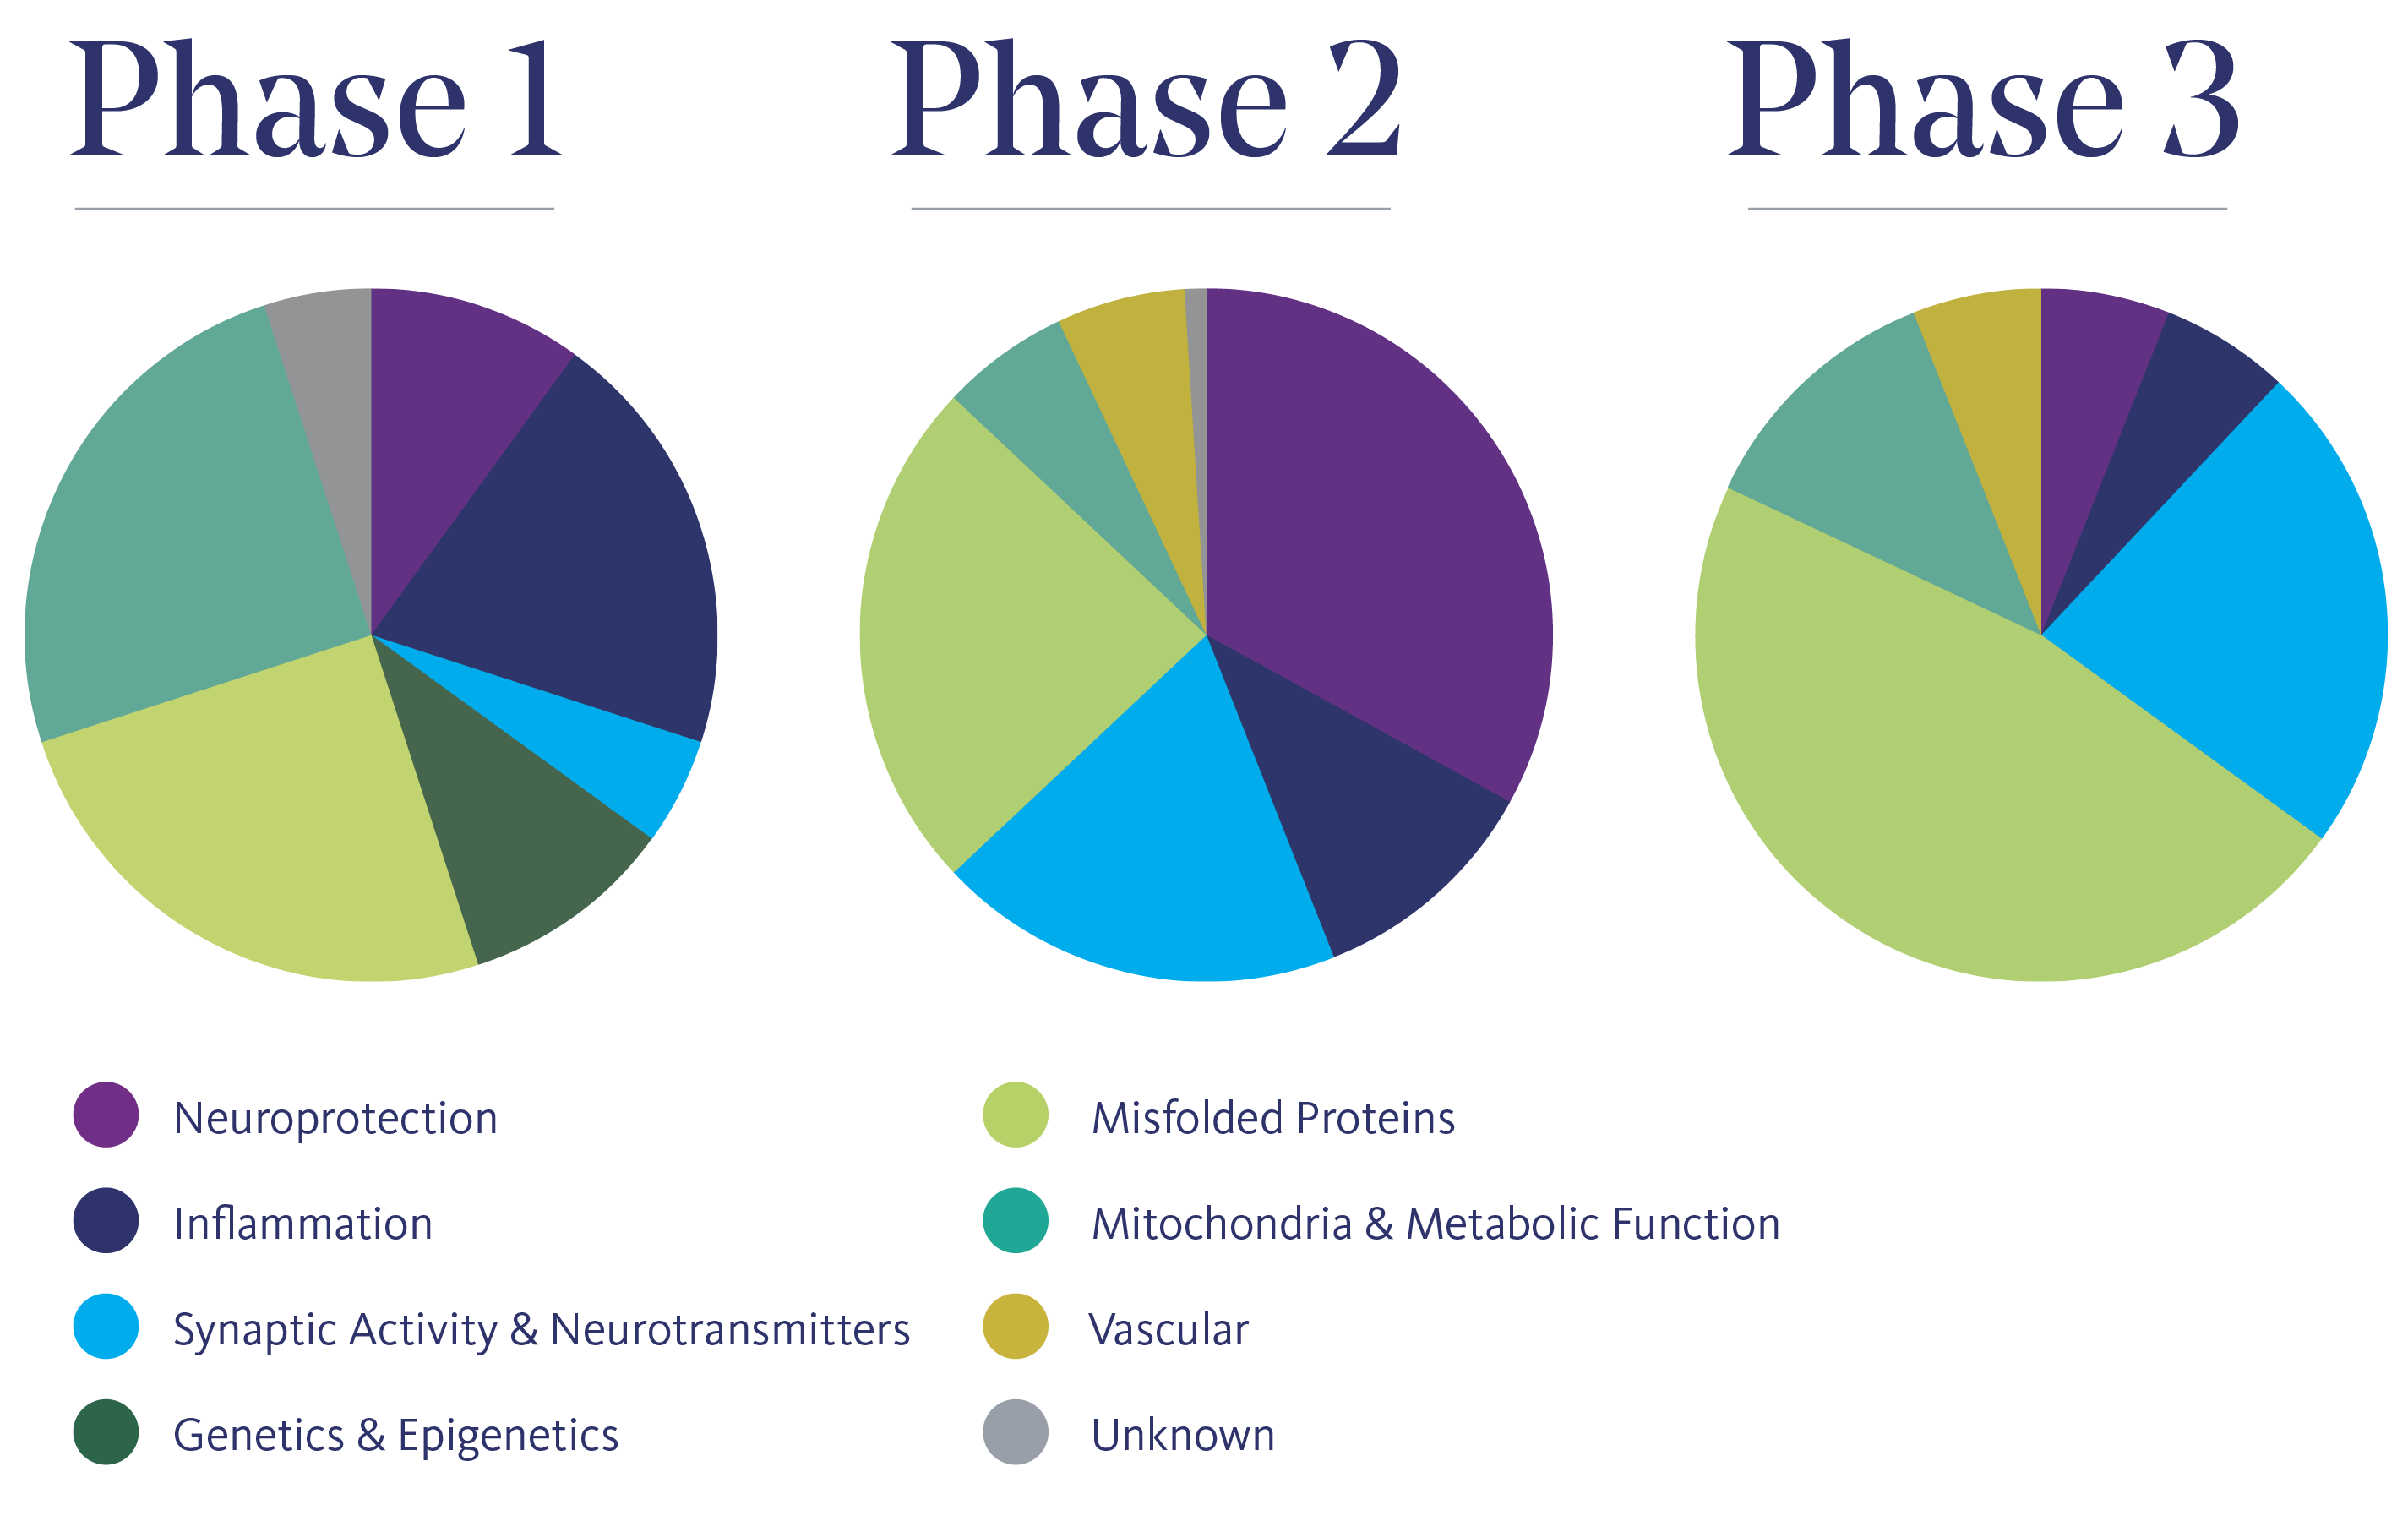 Trial Phases for Neuroprotection, Inflammation, Synaptic Activity, Genetics, Misfolded Proteins, Mitochondria, Vascular, and Unknown